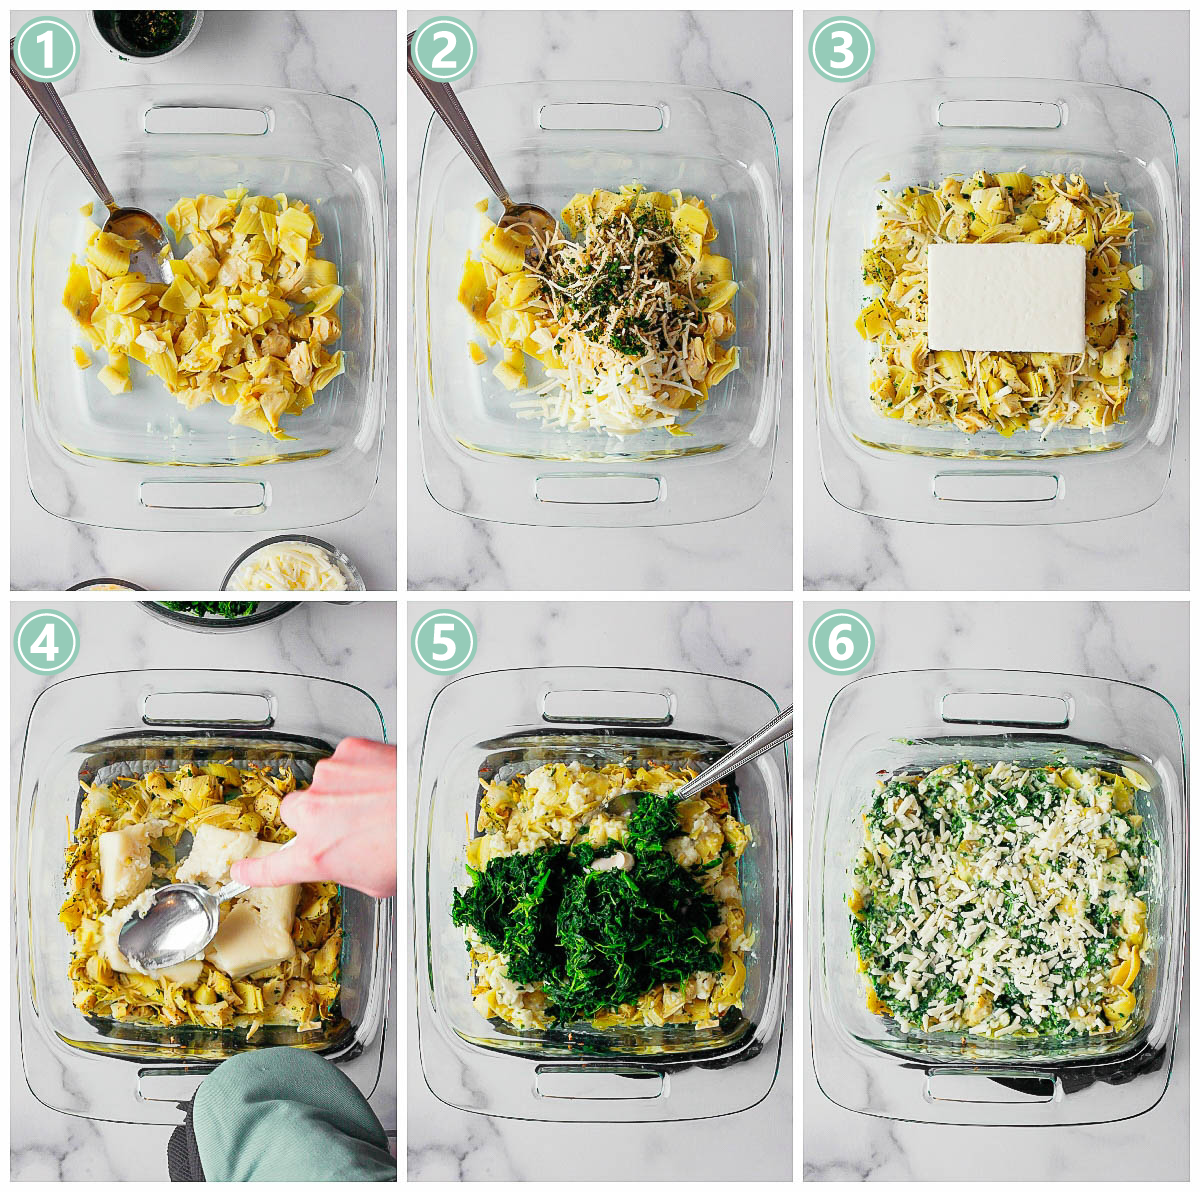 A series of photos showing how to make dairy free spinach artichoke dip.